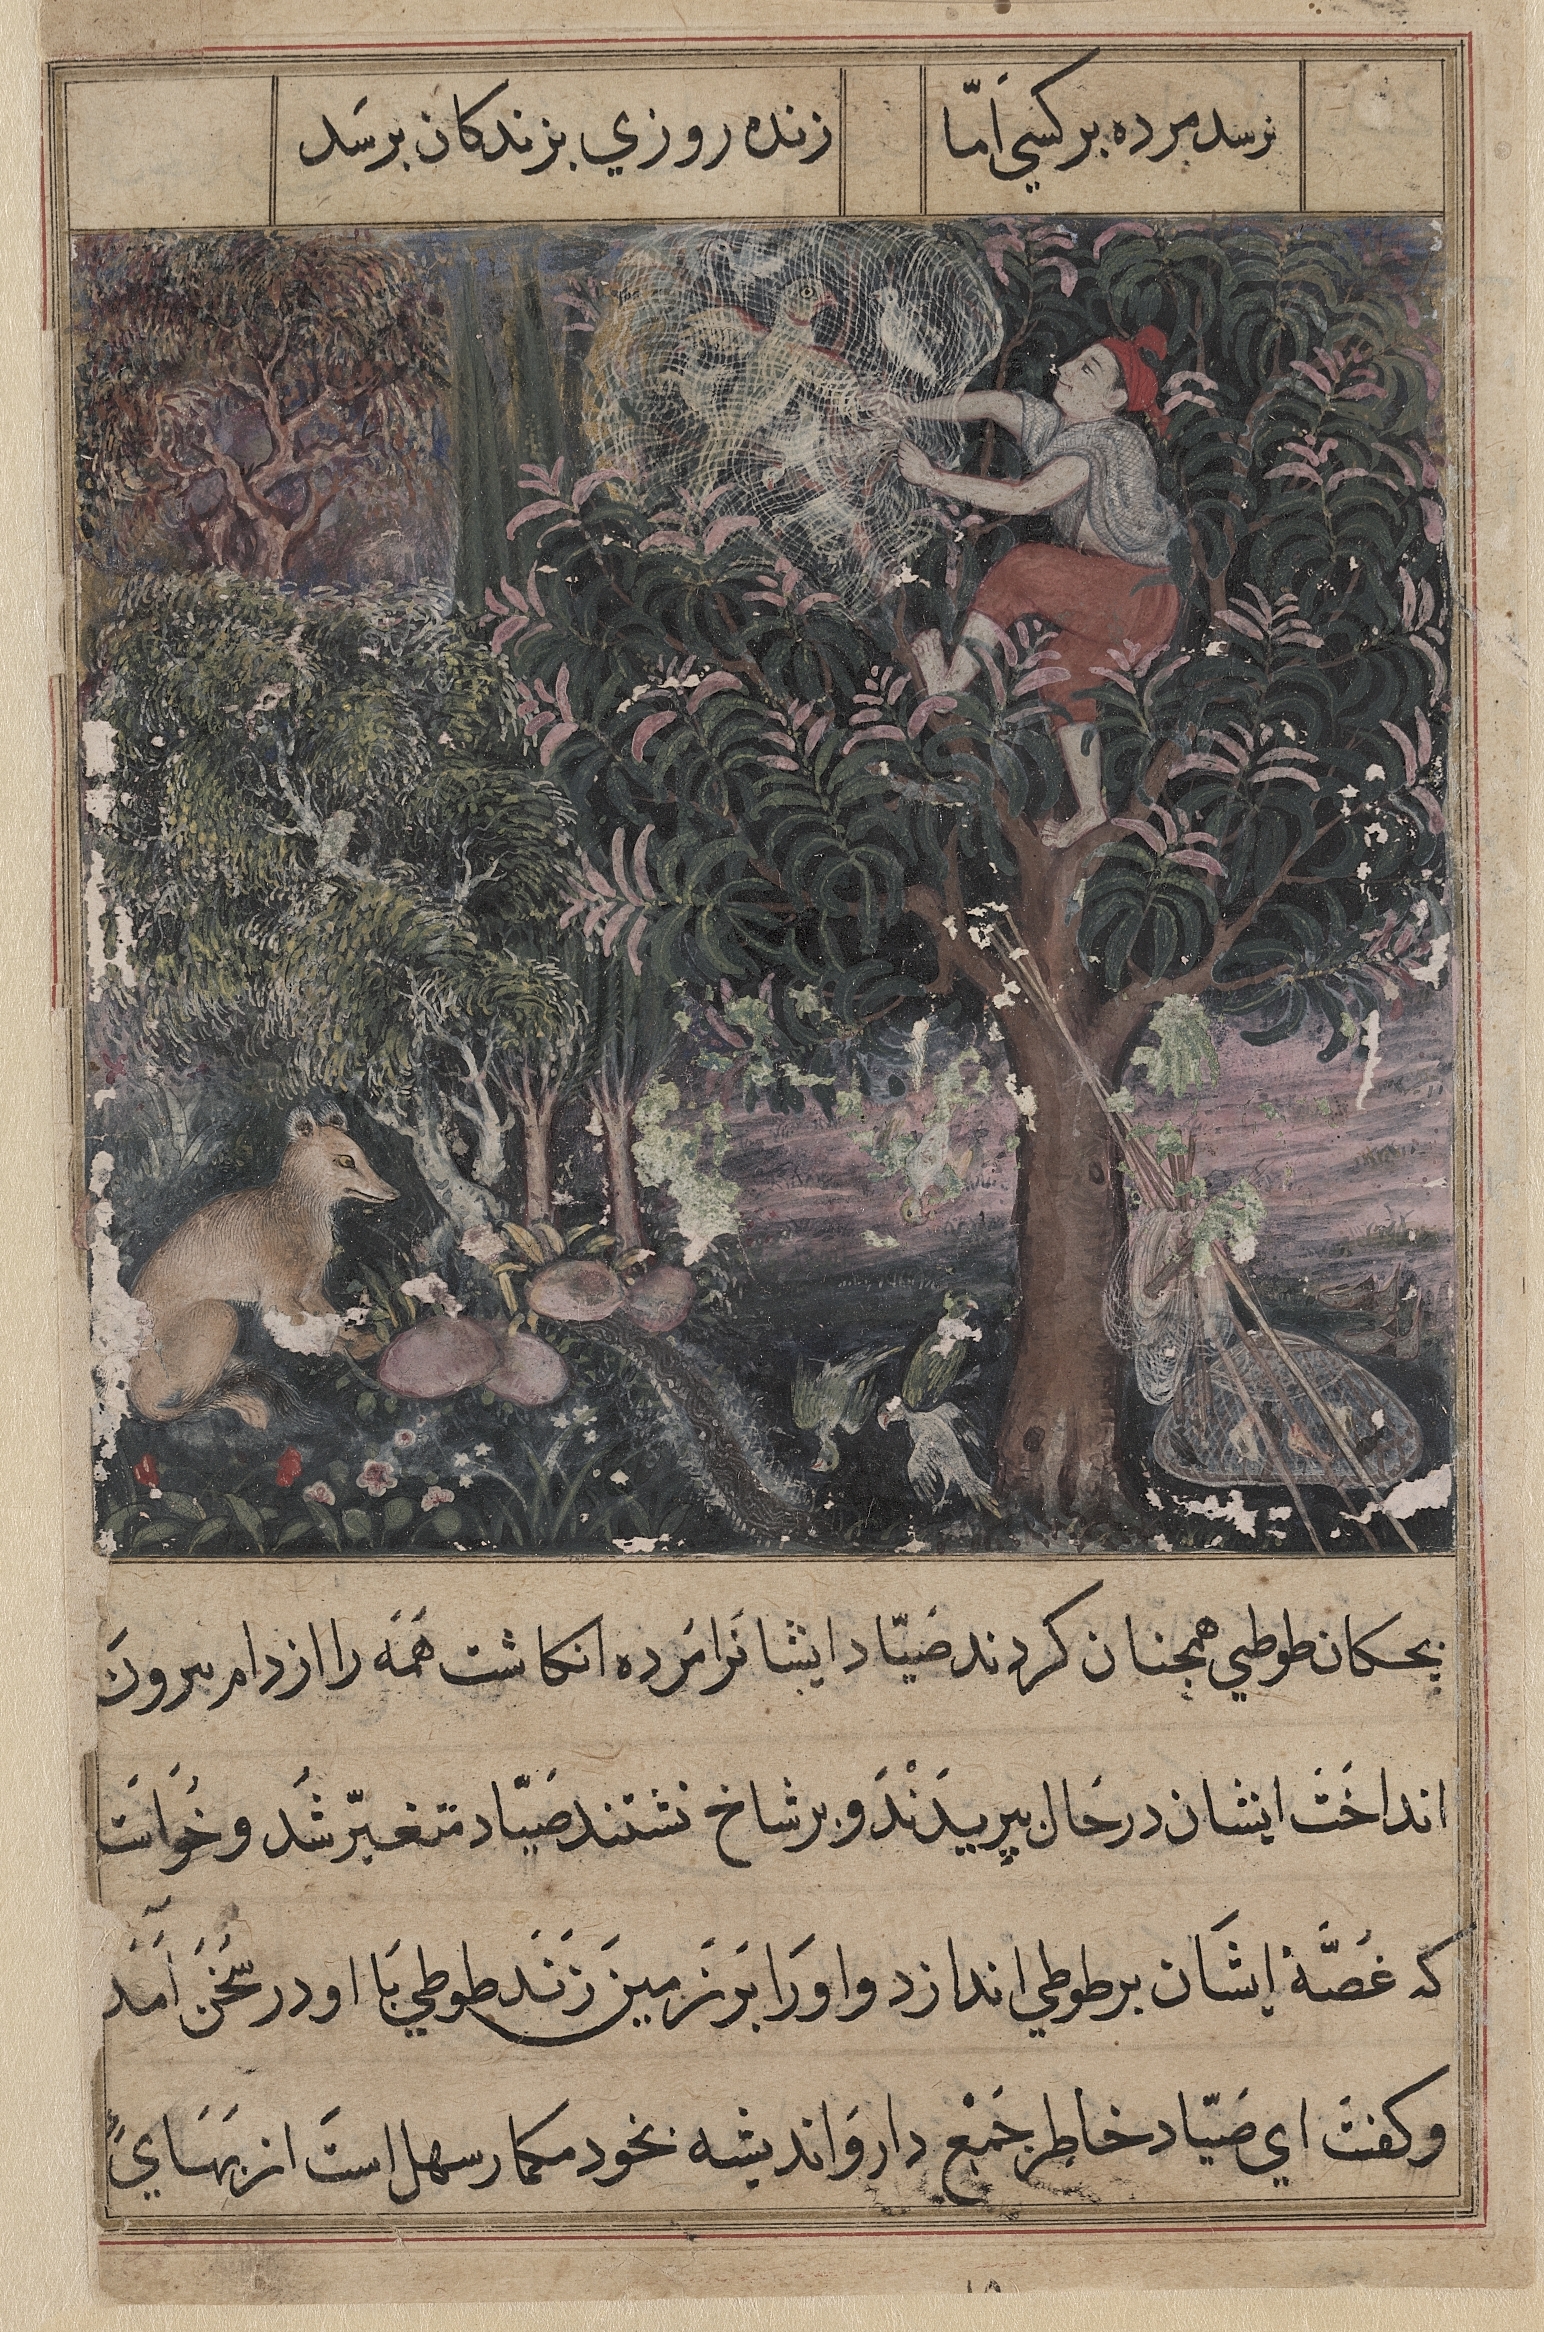 The hunter throws away the baby parrots, who pretend to be dead, and captures the mother, from a Tuti-nama (Tales of a Parrot): Fifth Night